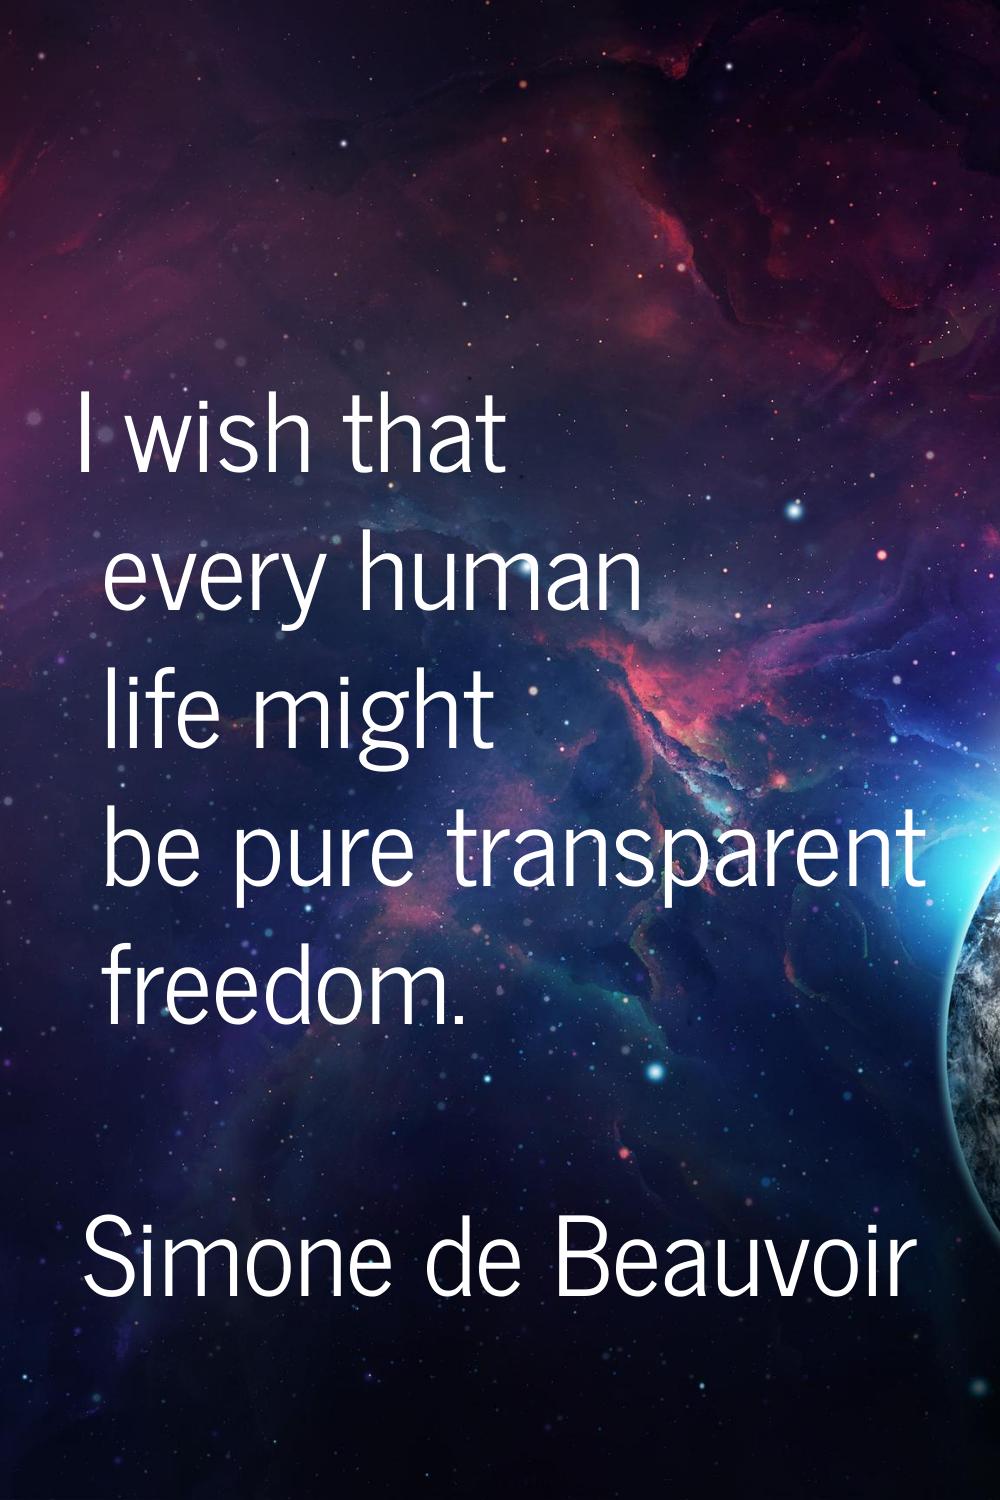 I wish that every human life might be pure transparent freedom.